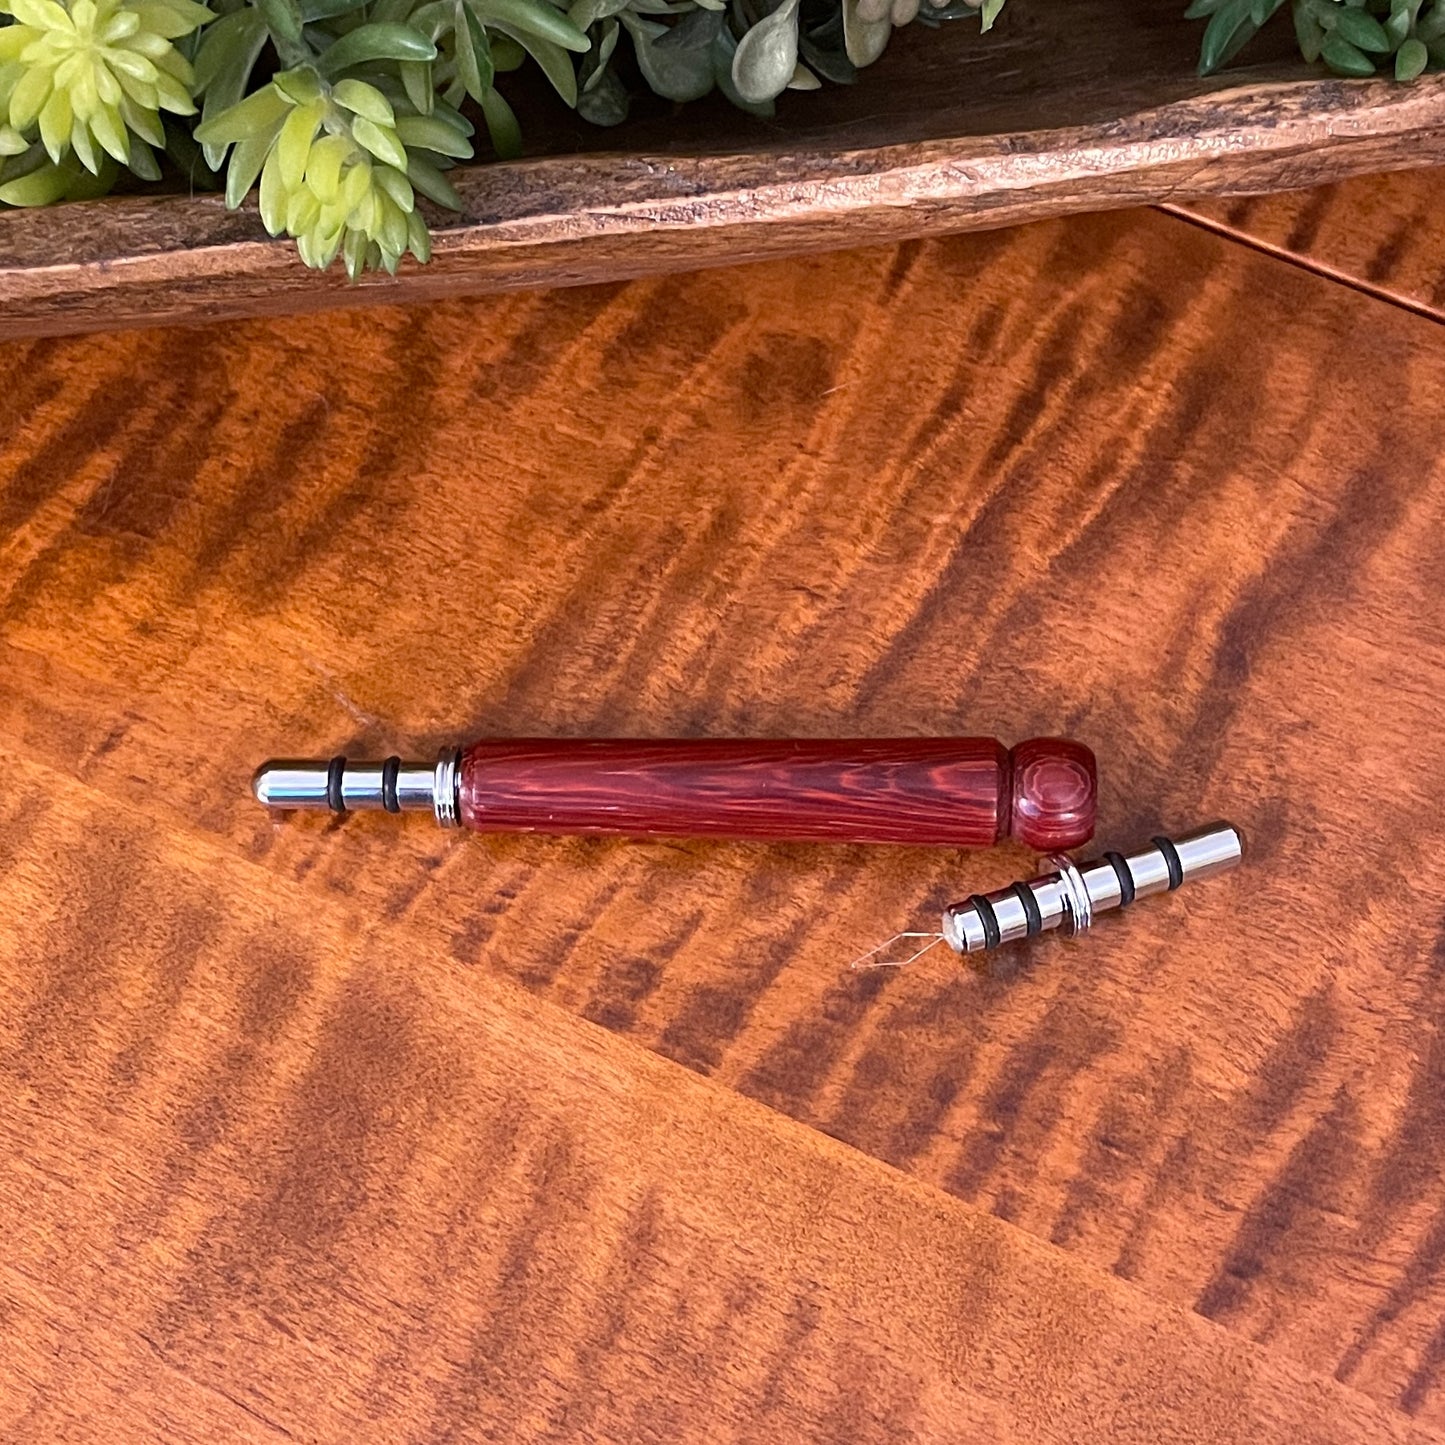 Hand-Crafted Double-Sided Needle Threader